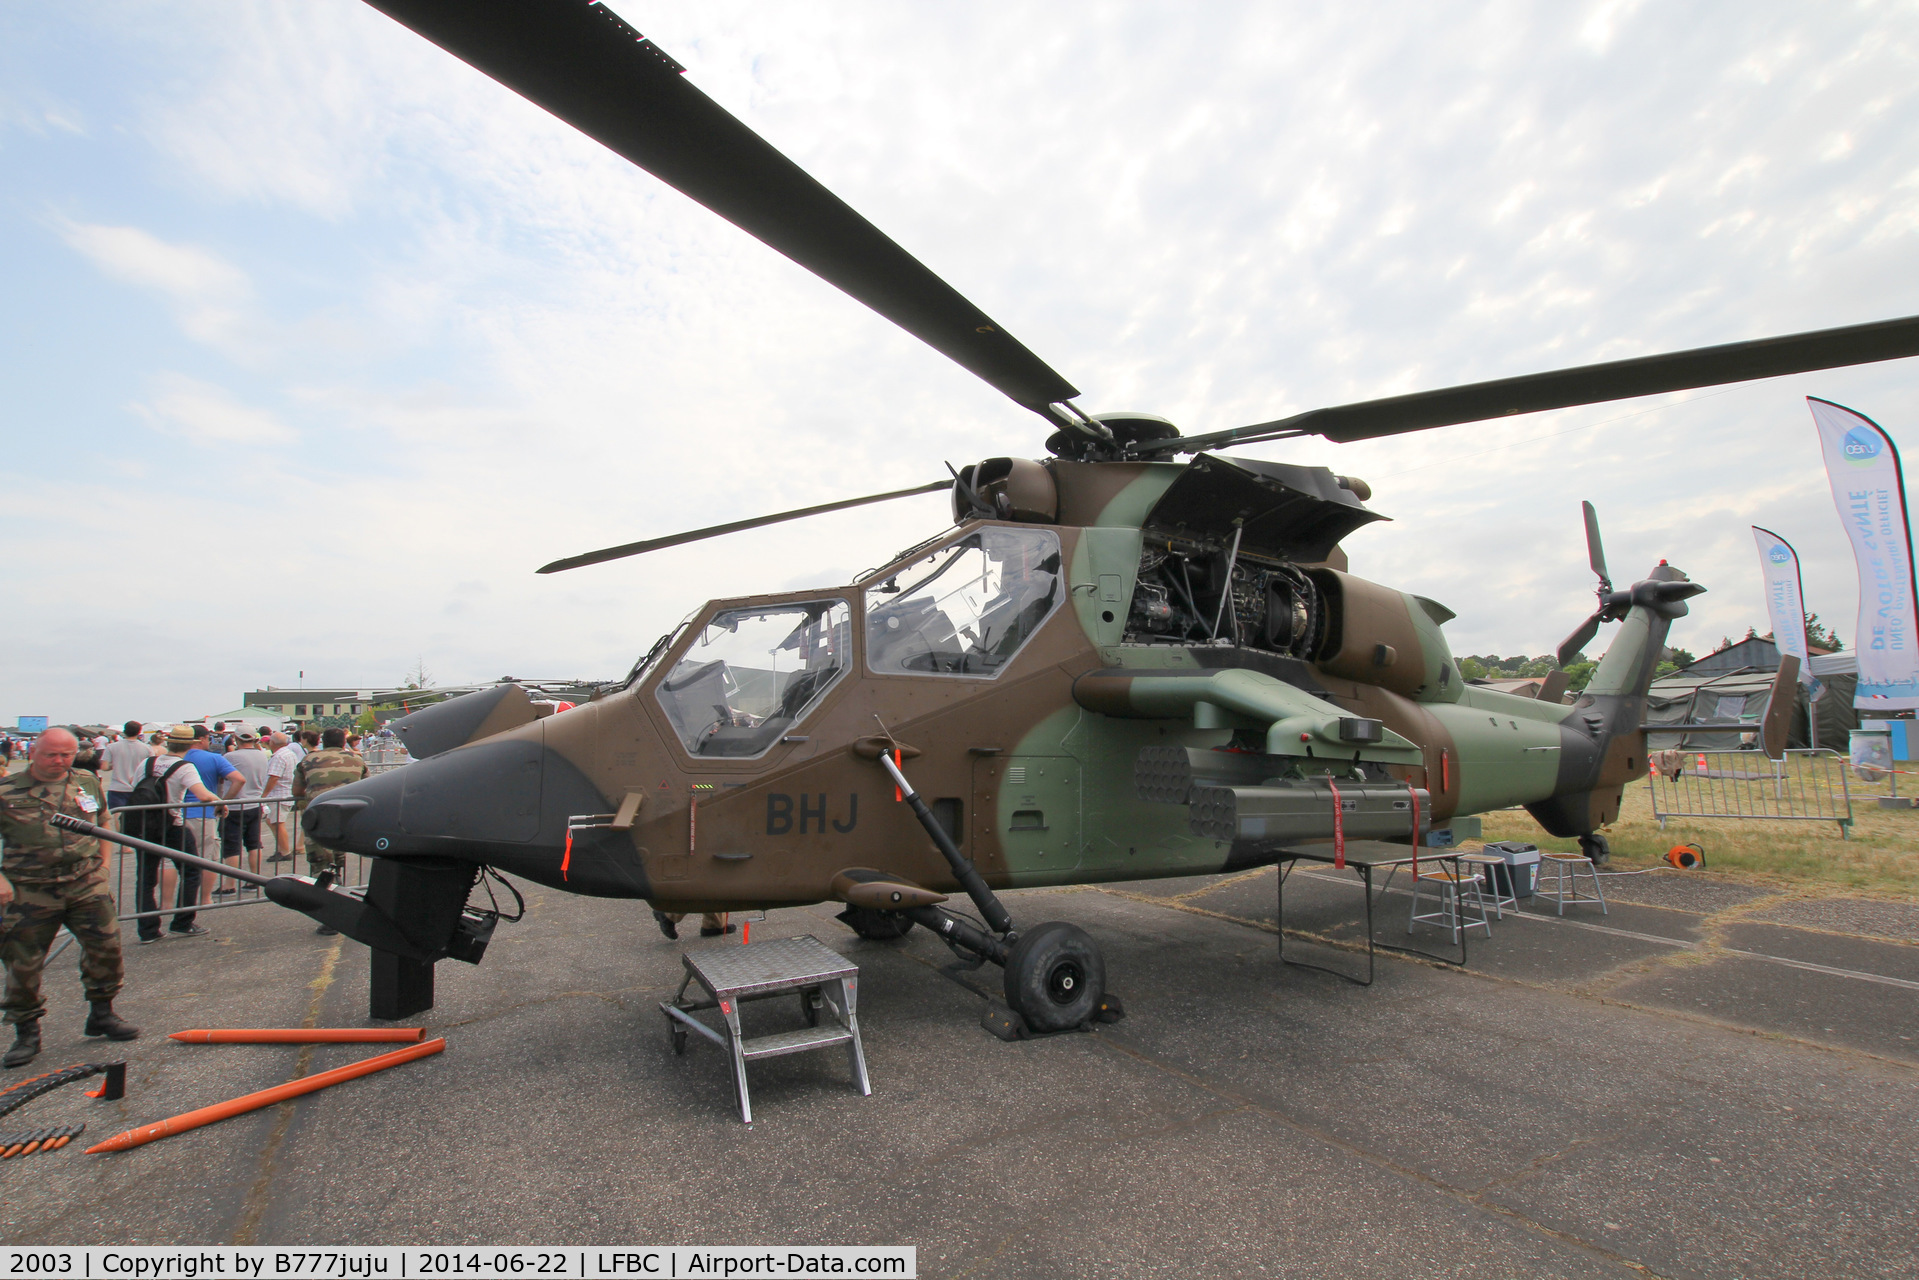 2003, Eurocopter EC-665 Tigre HAP C/N 2003, on display at Cazaux Open-base 2014